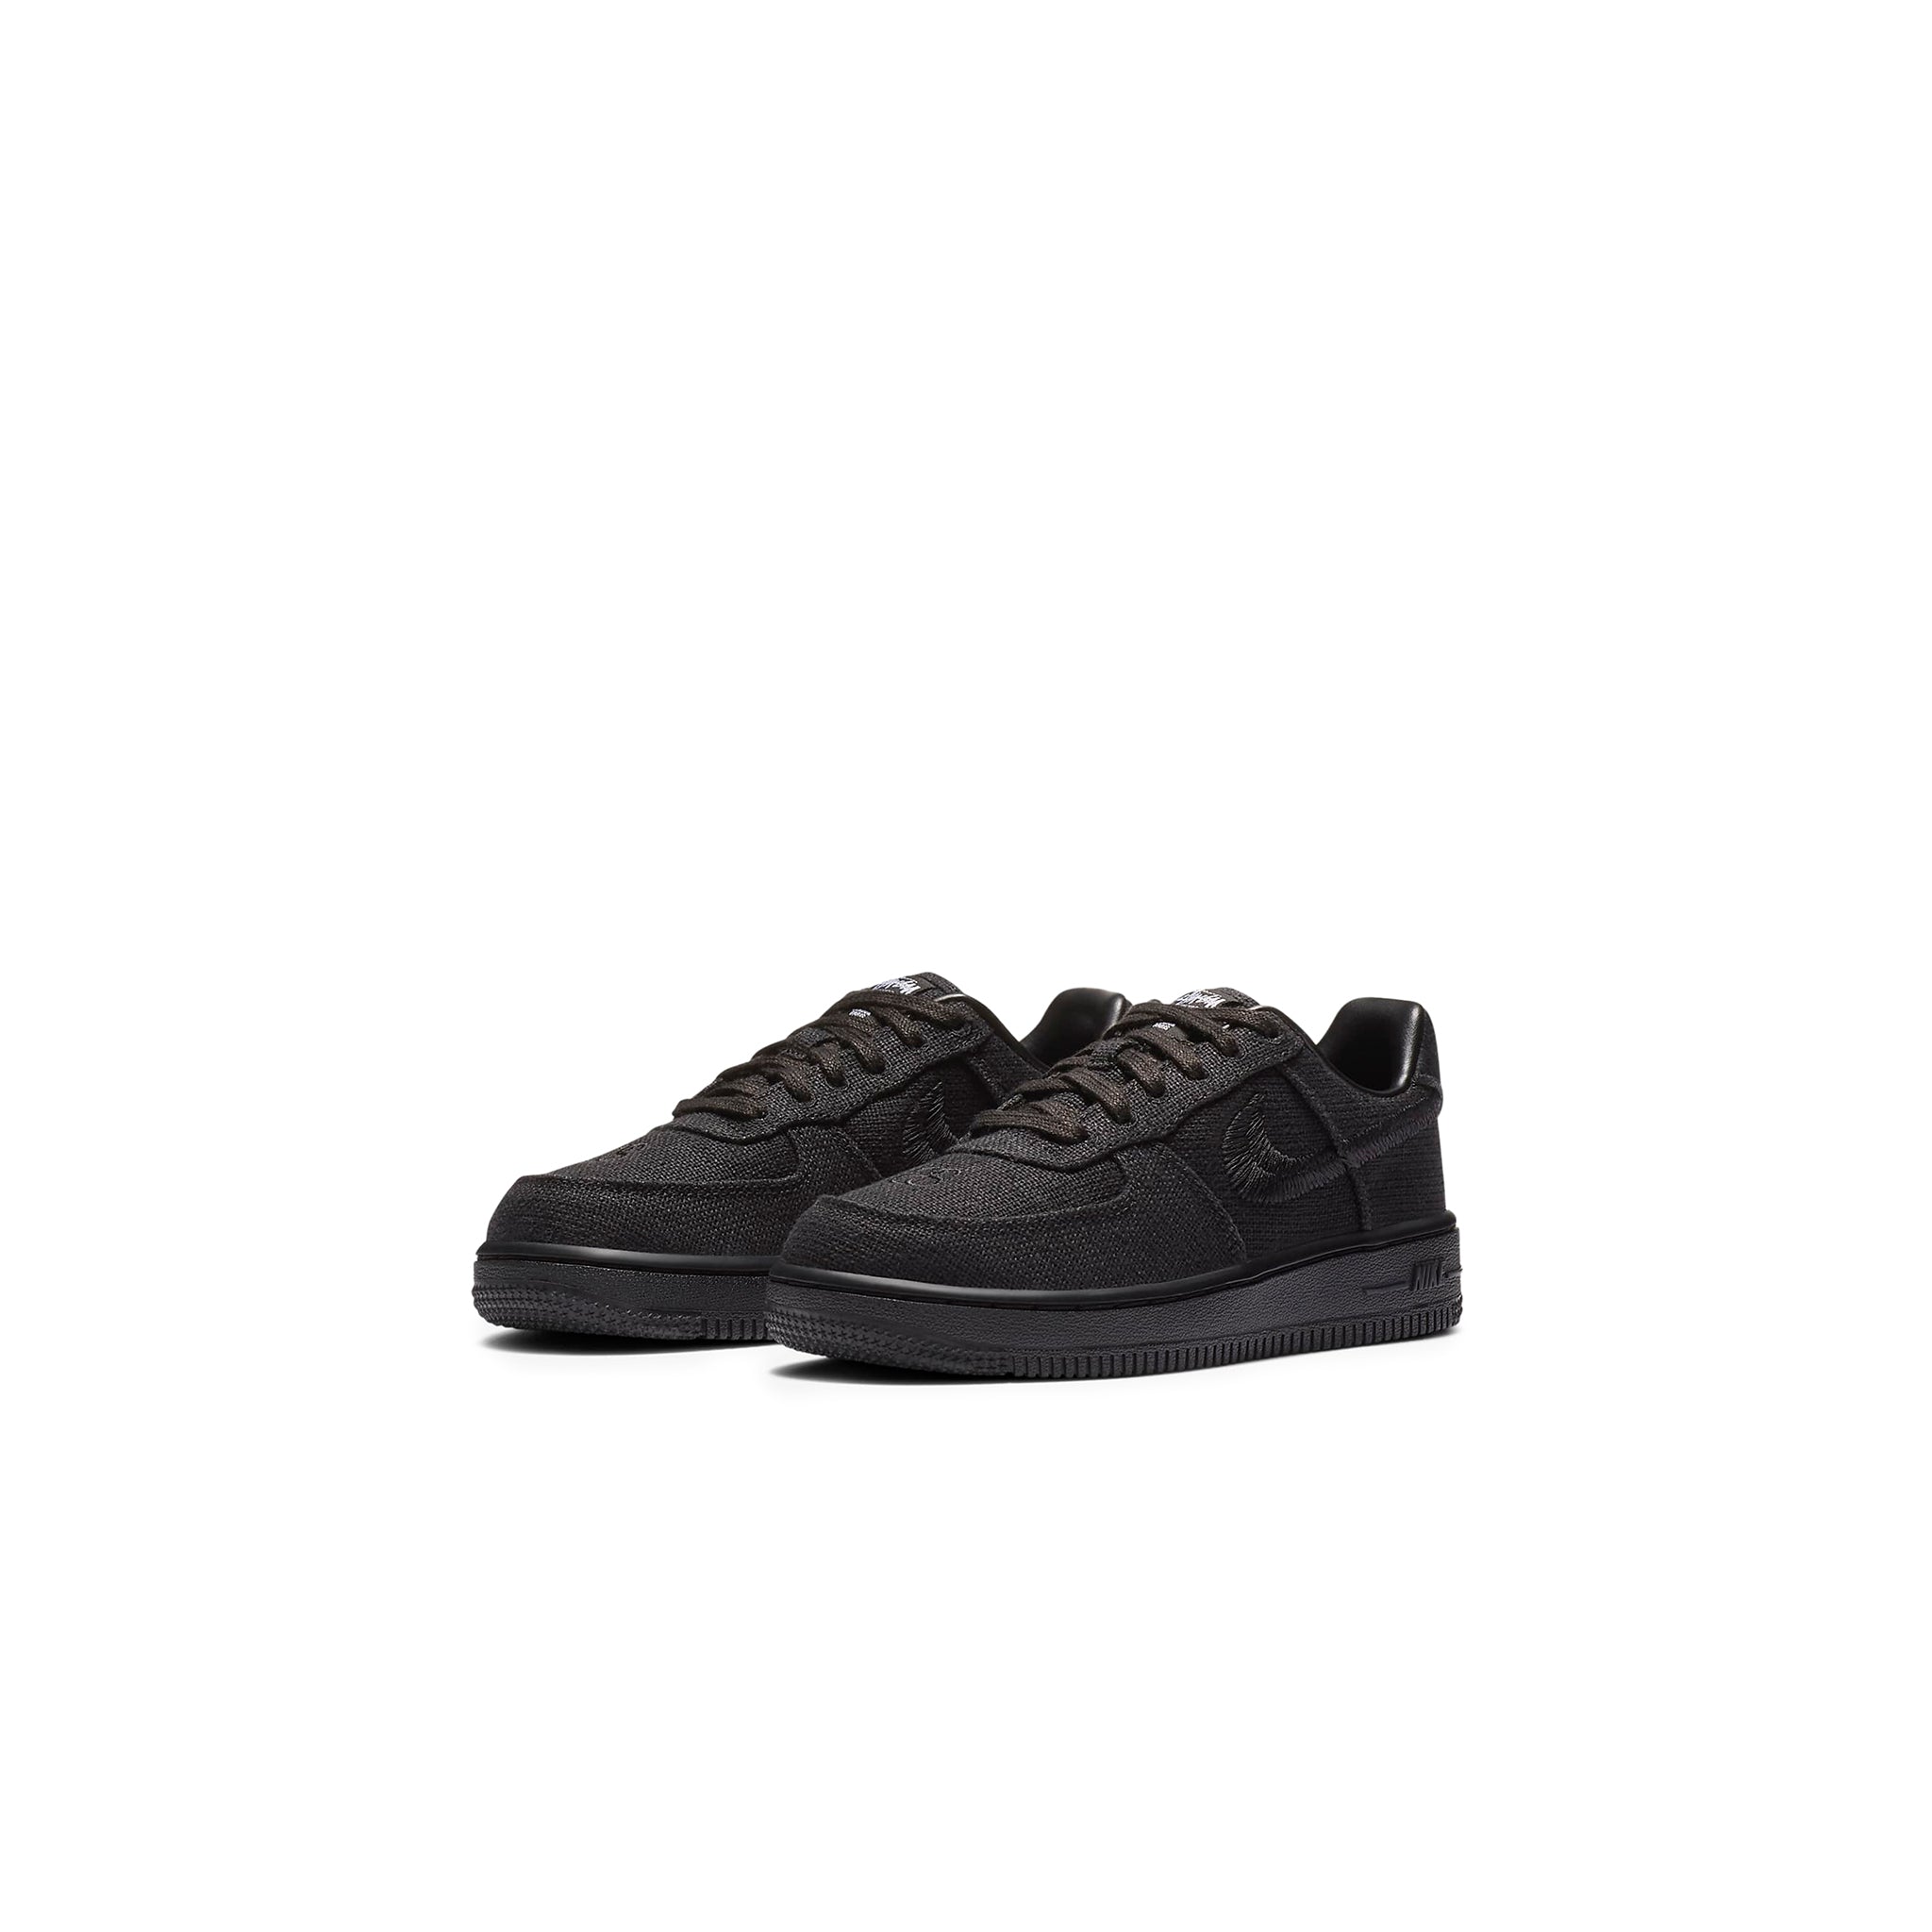 Front side view of Stussy x Nike Air Force 1 Low Black (PS) DD1578-001